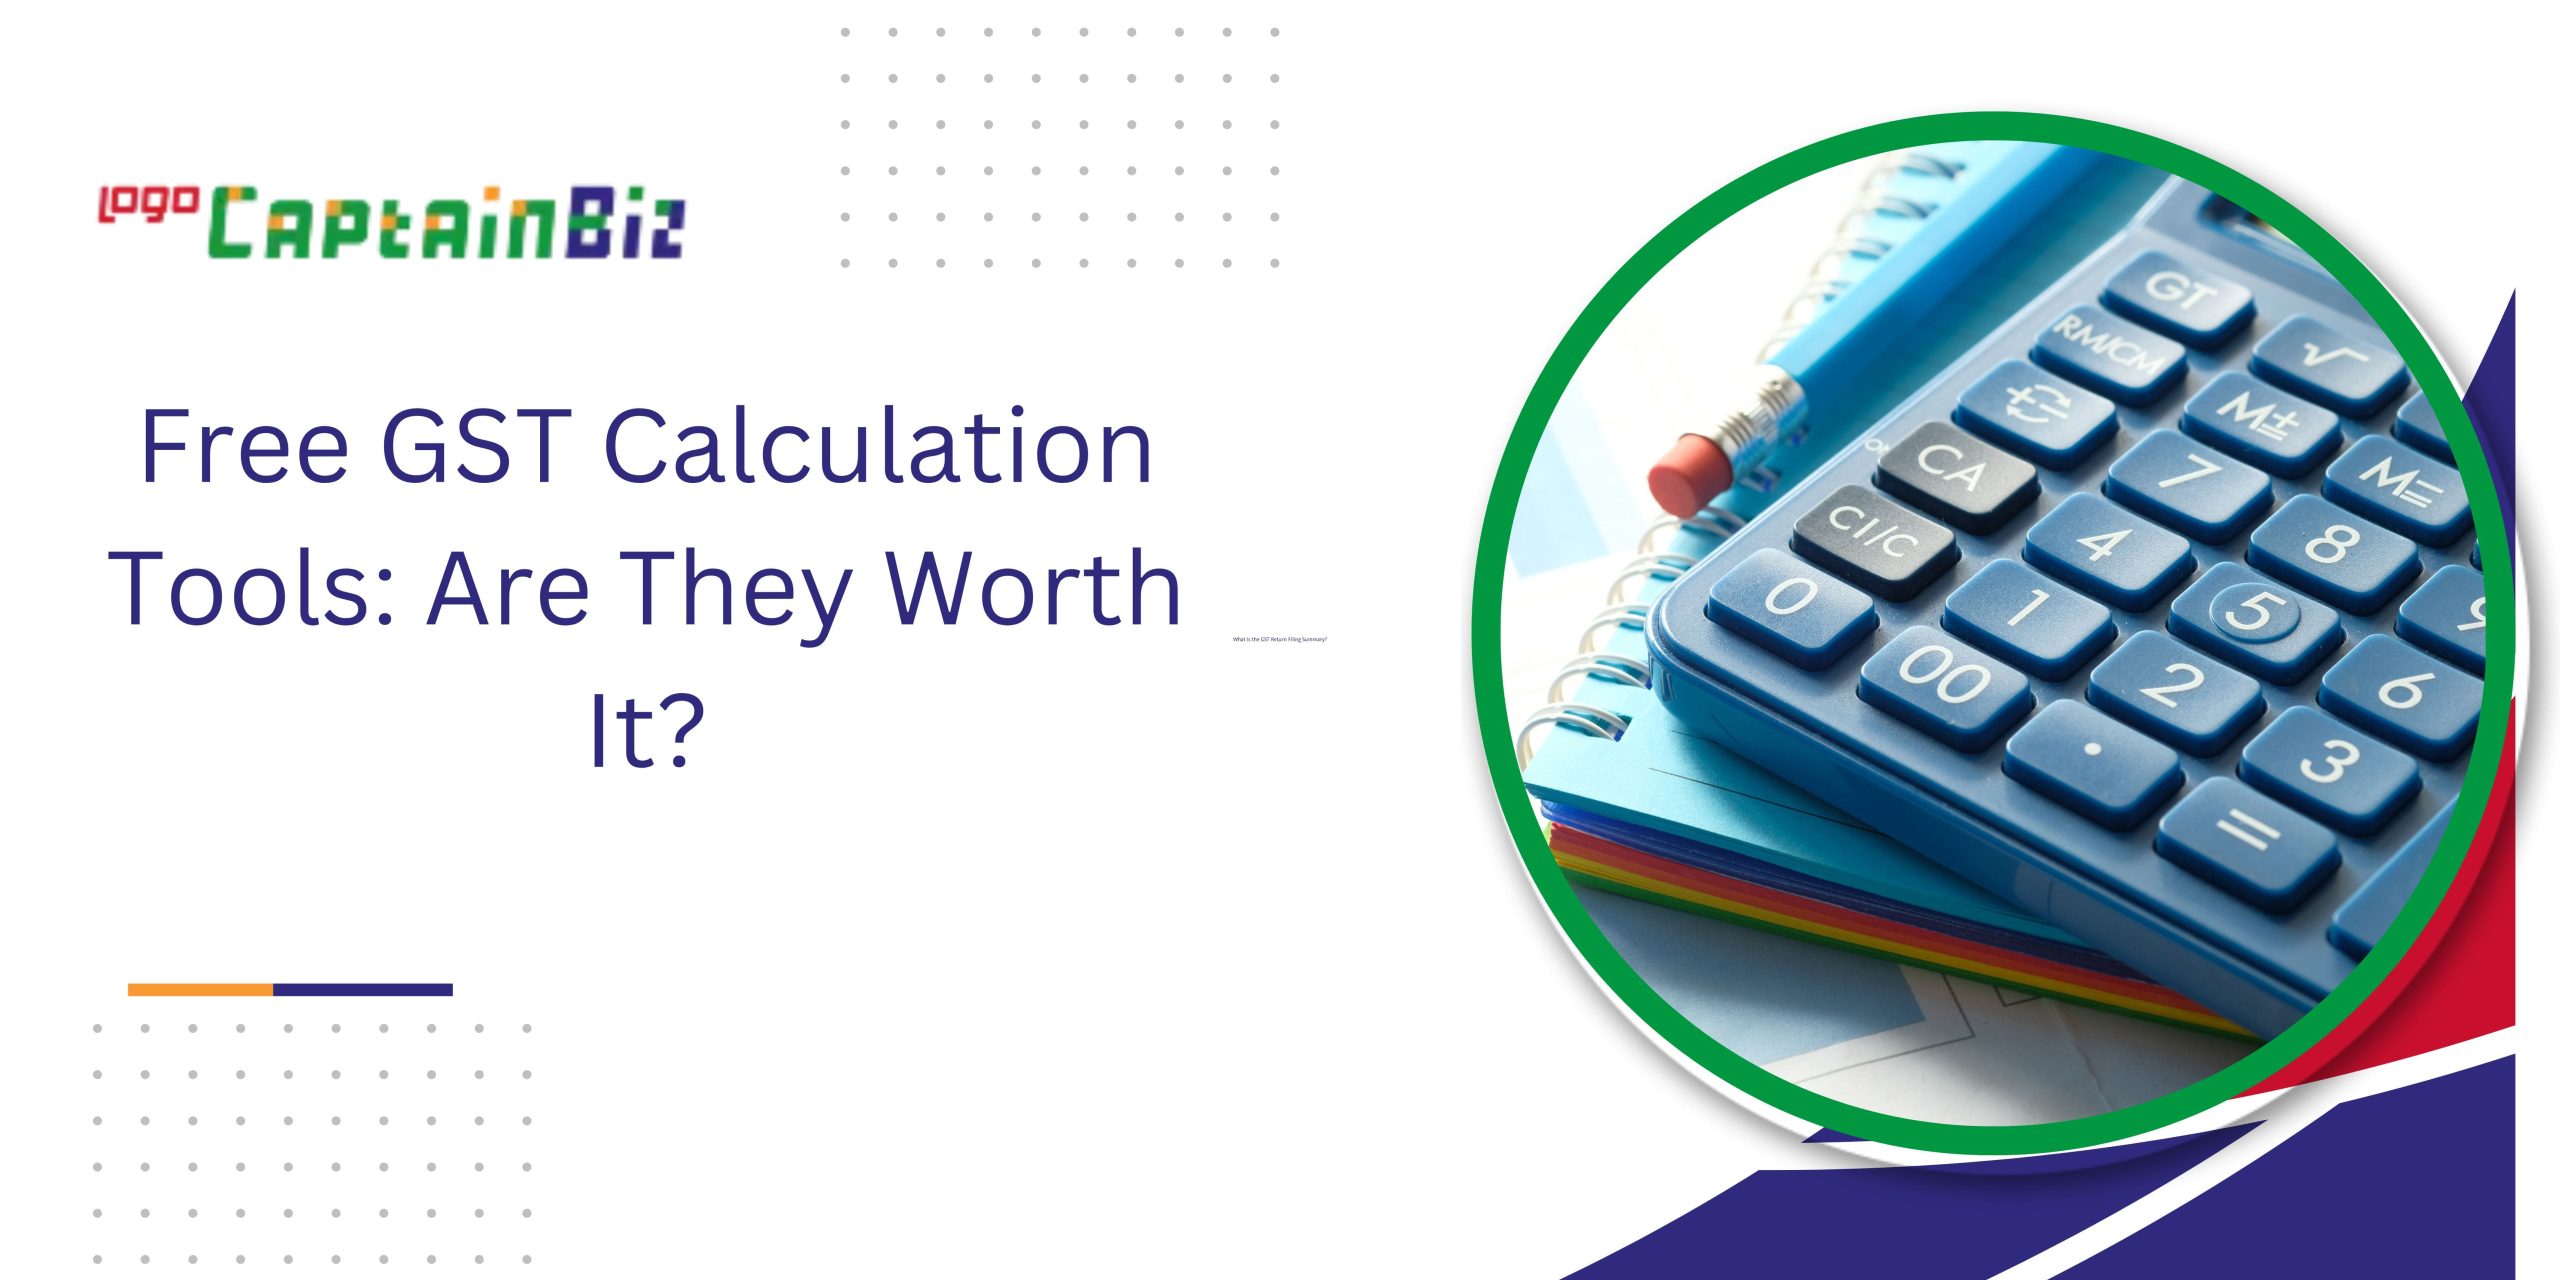 CaptainBiz: Free GST Calculation Tools: Are They Worth It?